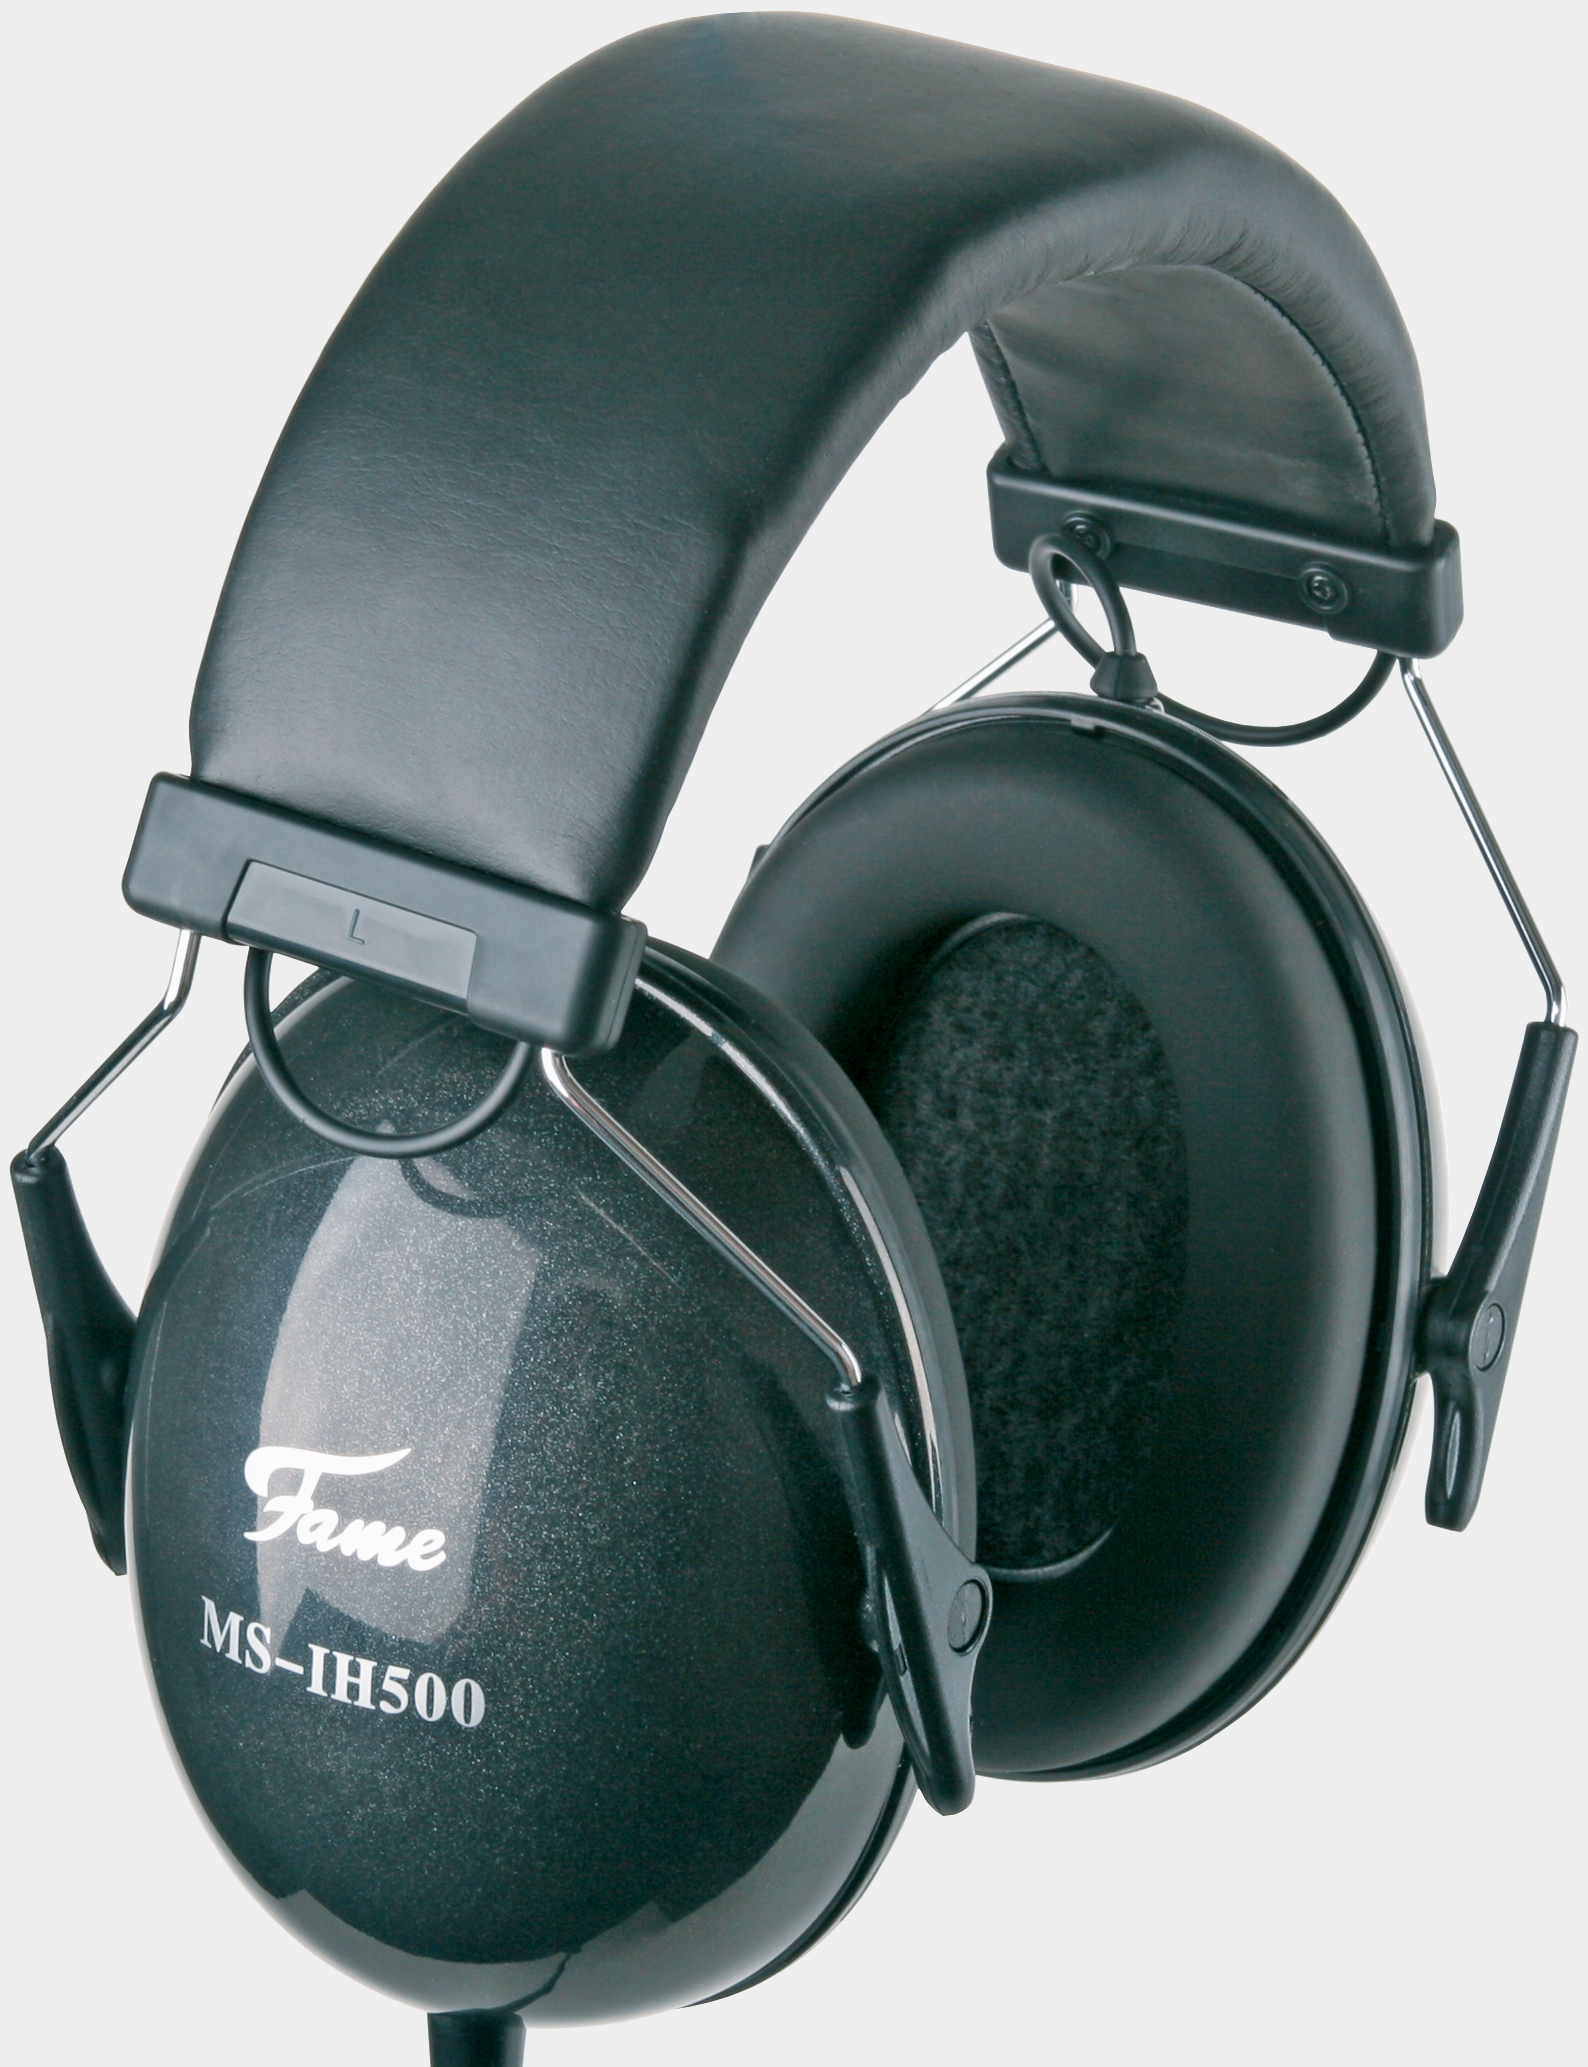 Fame MS-IH 500 Auricular | MUSIC STORE professional